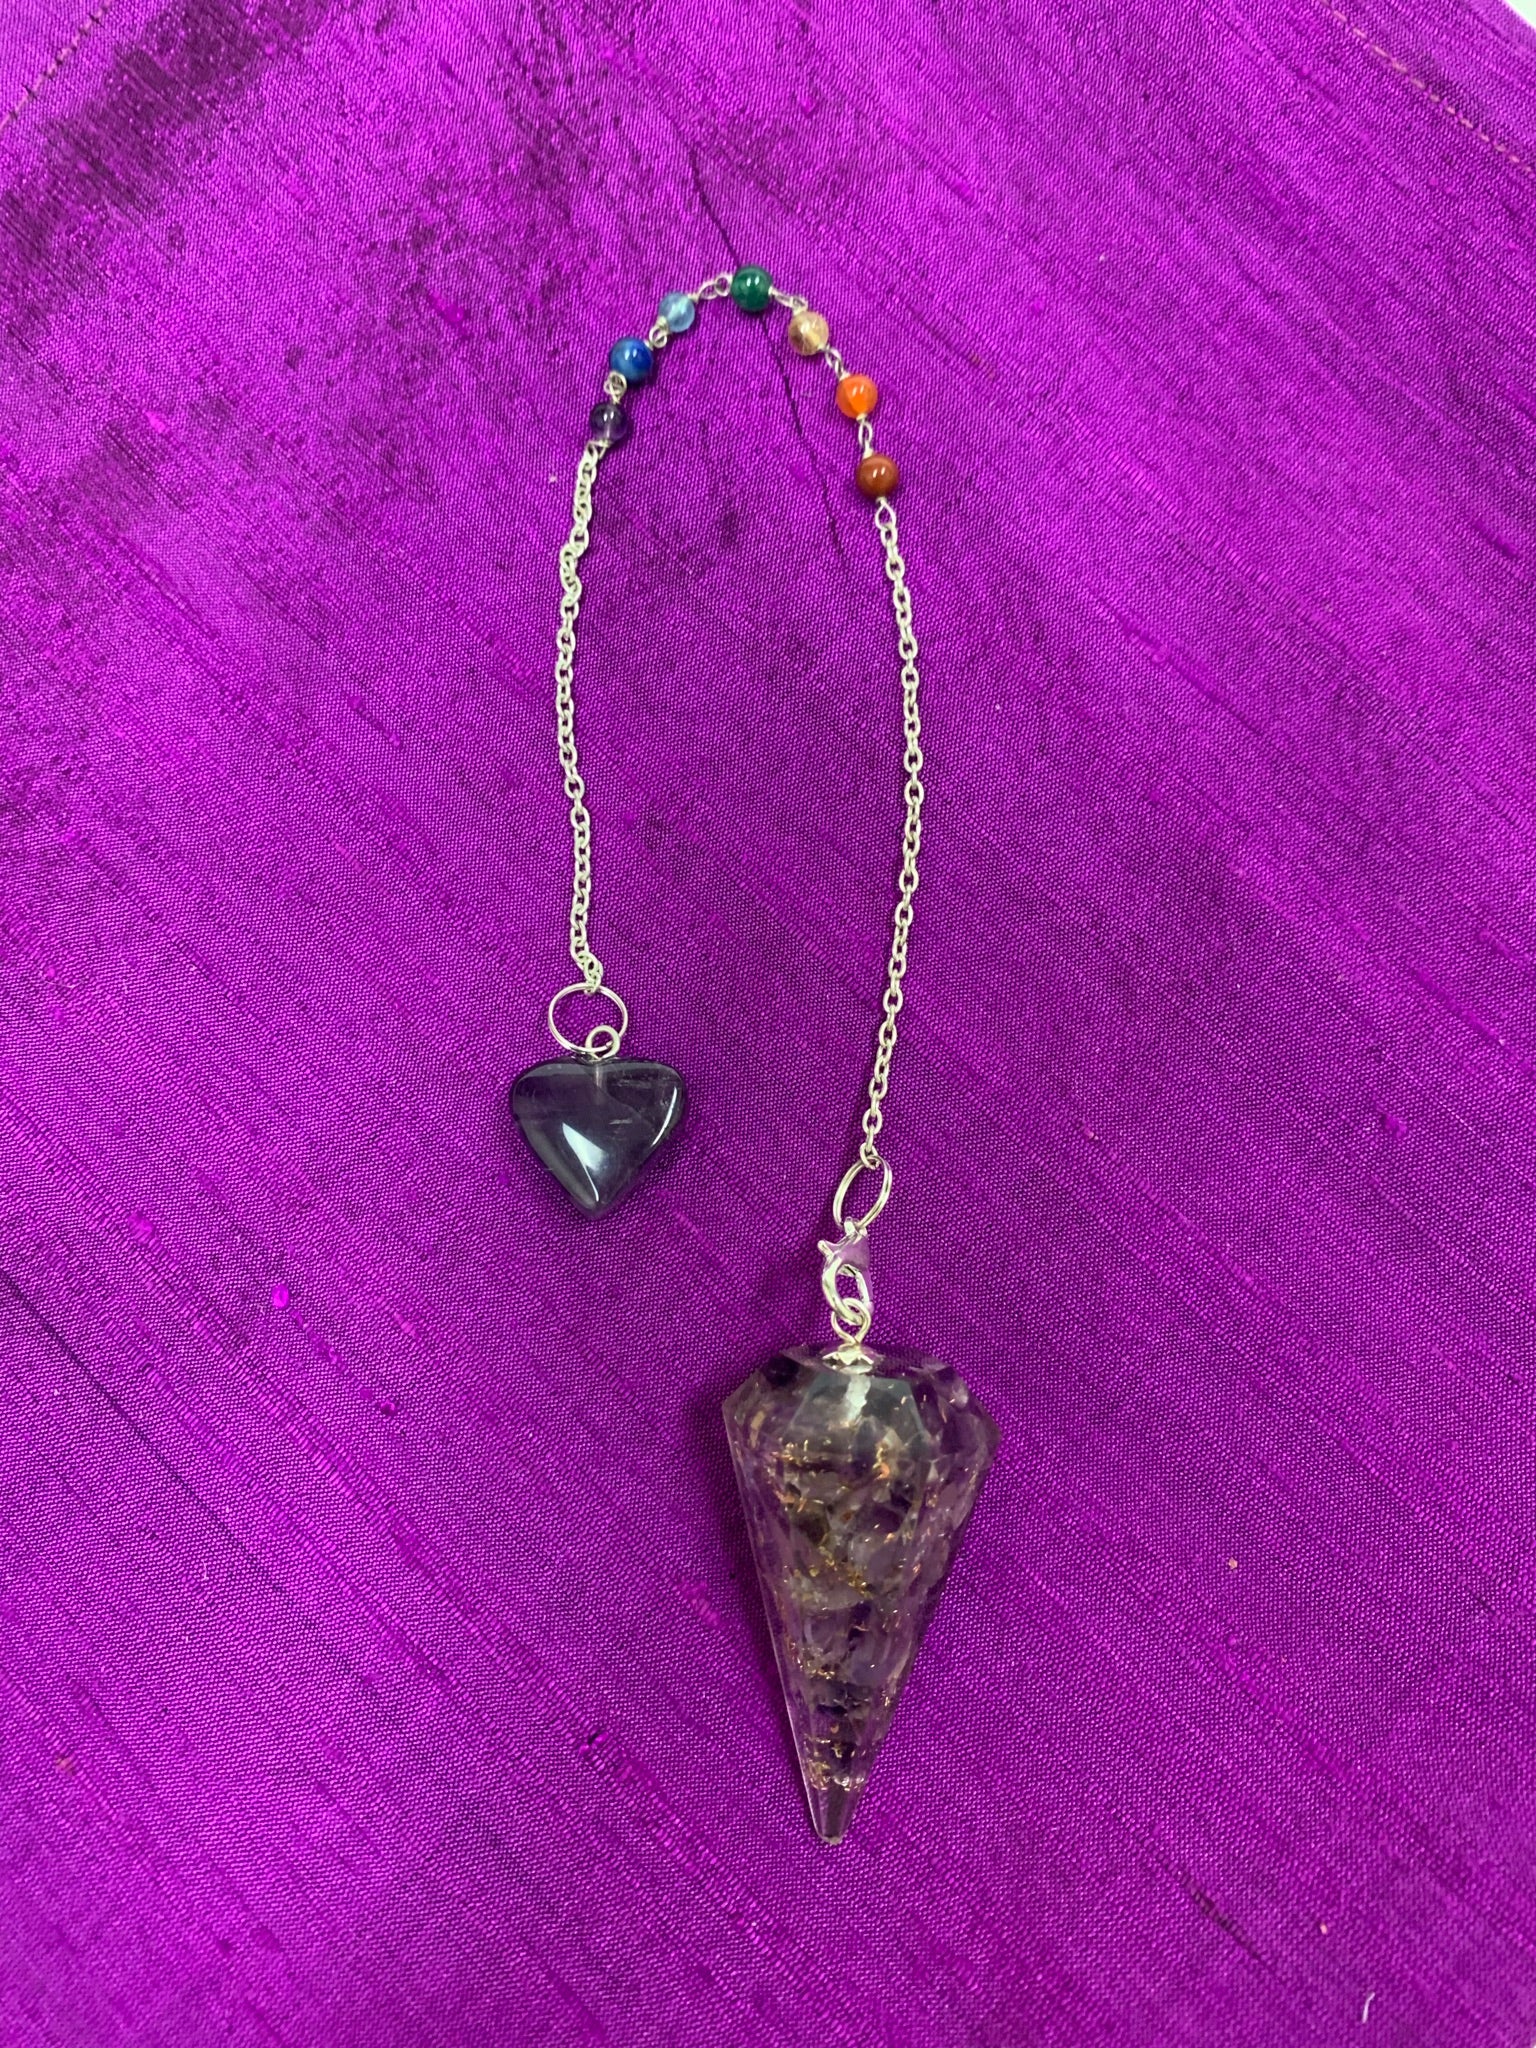 Orgonite pendulum with amethyst, on a thin silver (not sterling) chain, accented by chakra gemstone beads, 1 for each of the 7 major chakras and an amethyst heart at the very end of the chain. 